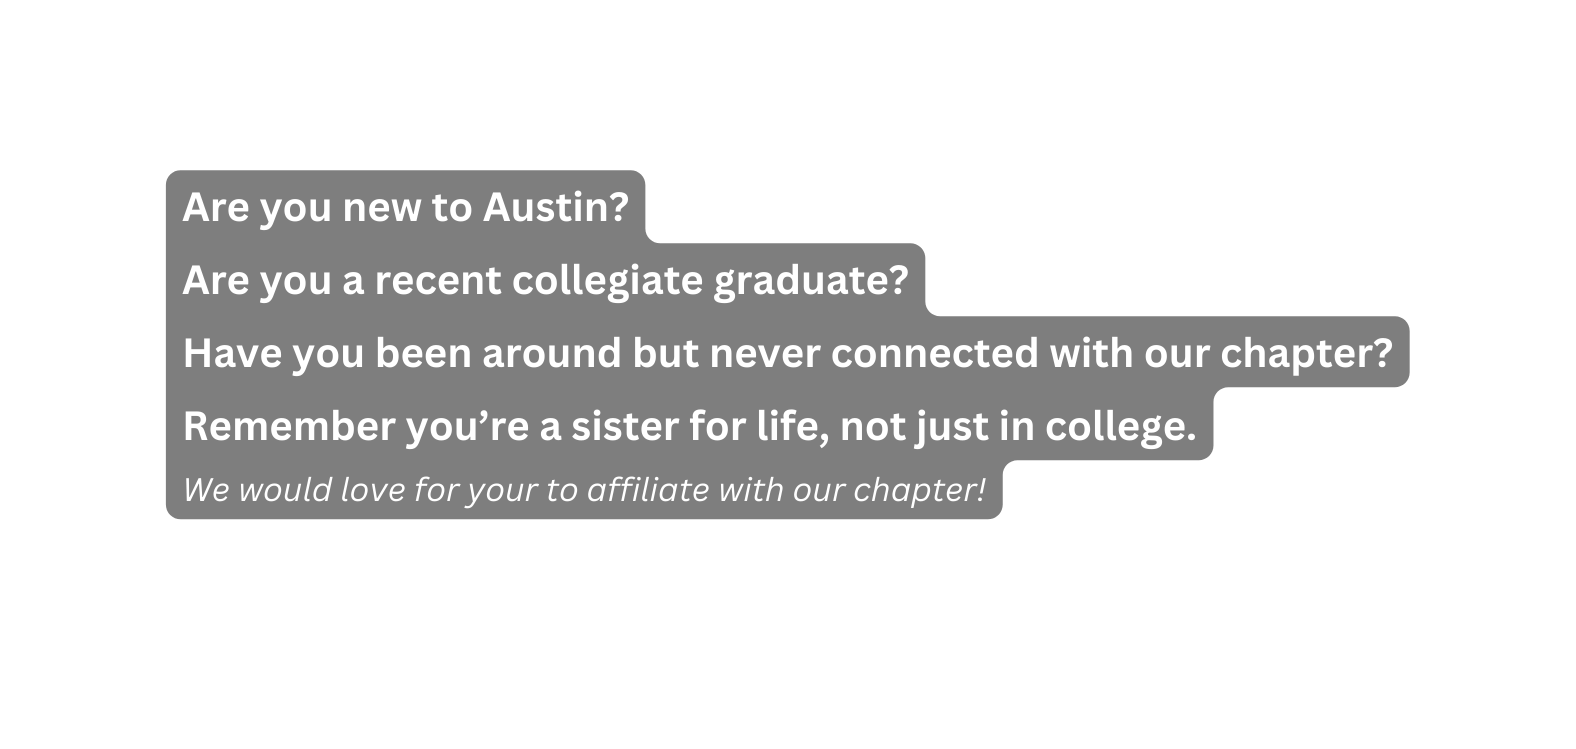 Are you new to Austin Are you a recent collegiate graduate Have you been around but never connected with our chapter Remember you re a sister for life not just in college We would love for your to affiliate with our chapter